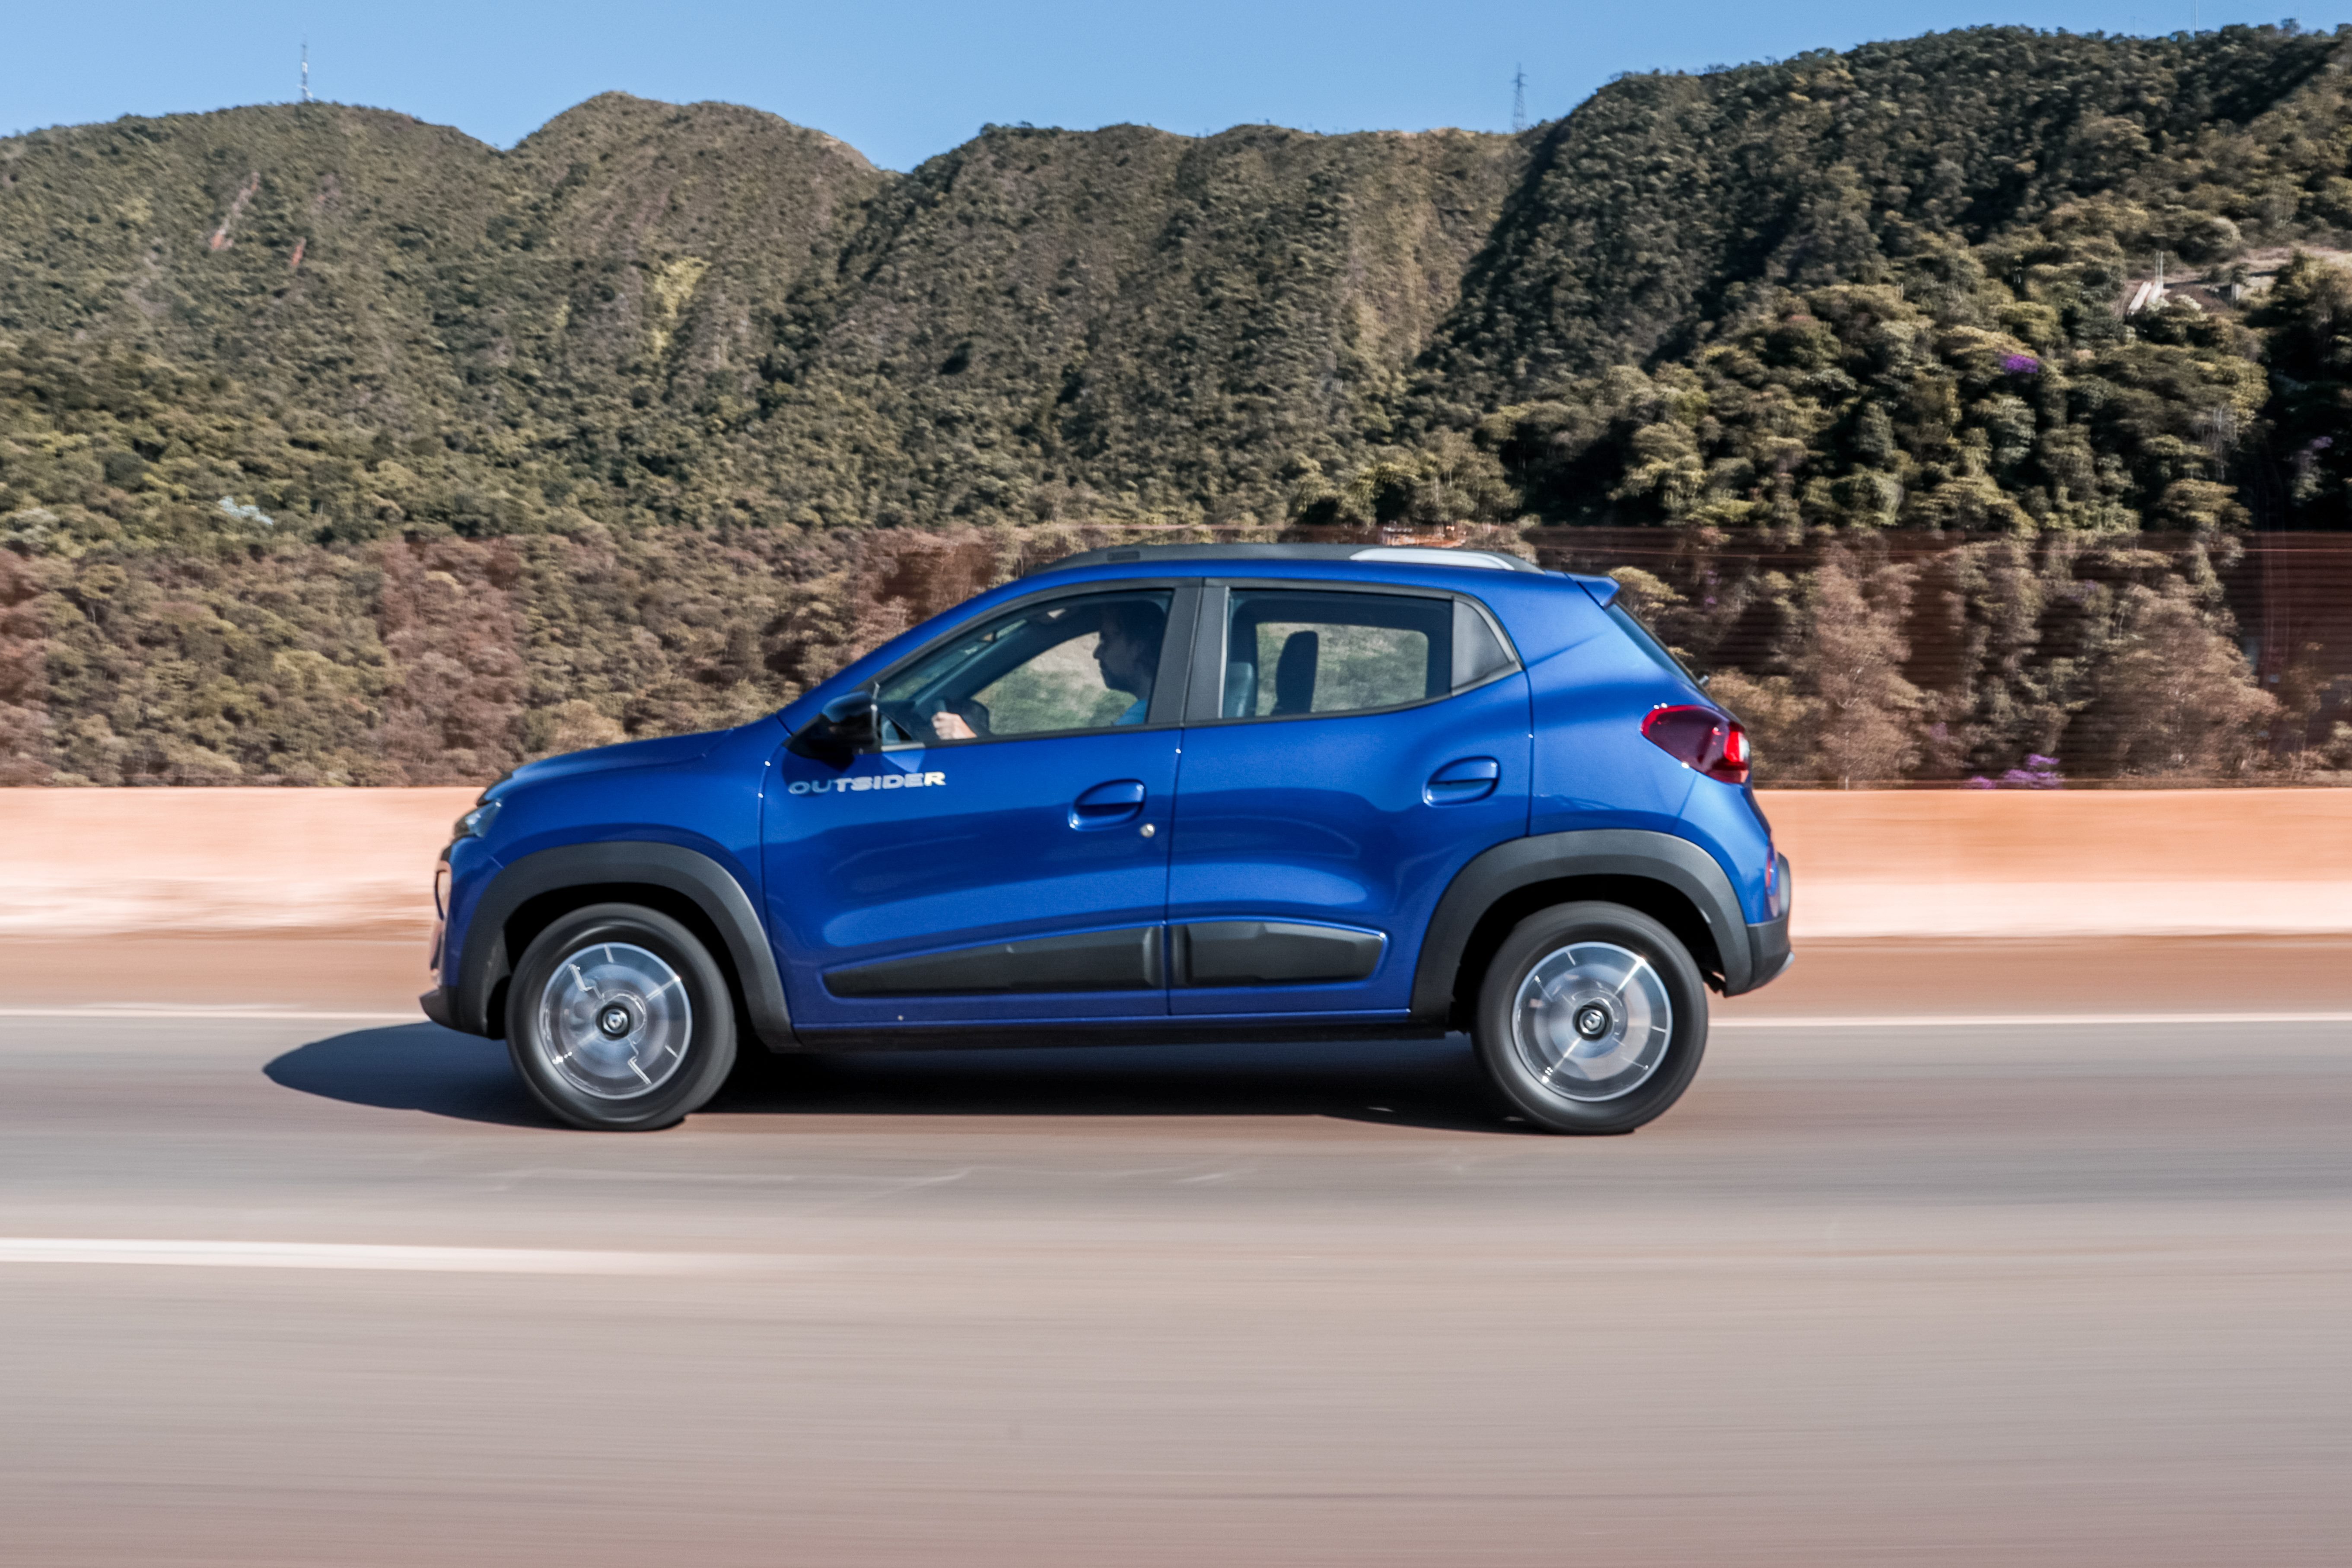 Comparison: Renault Kwid blue from the side.